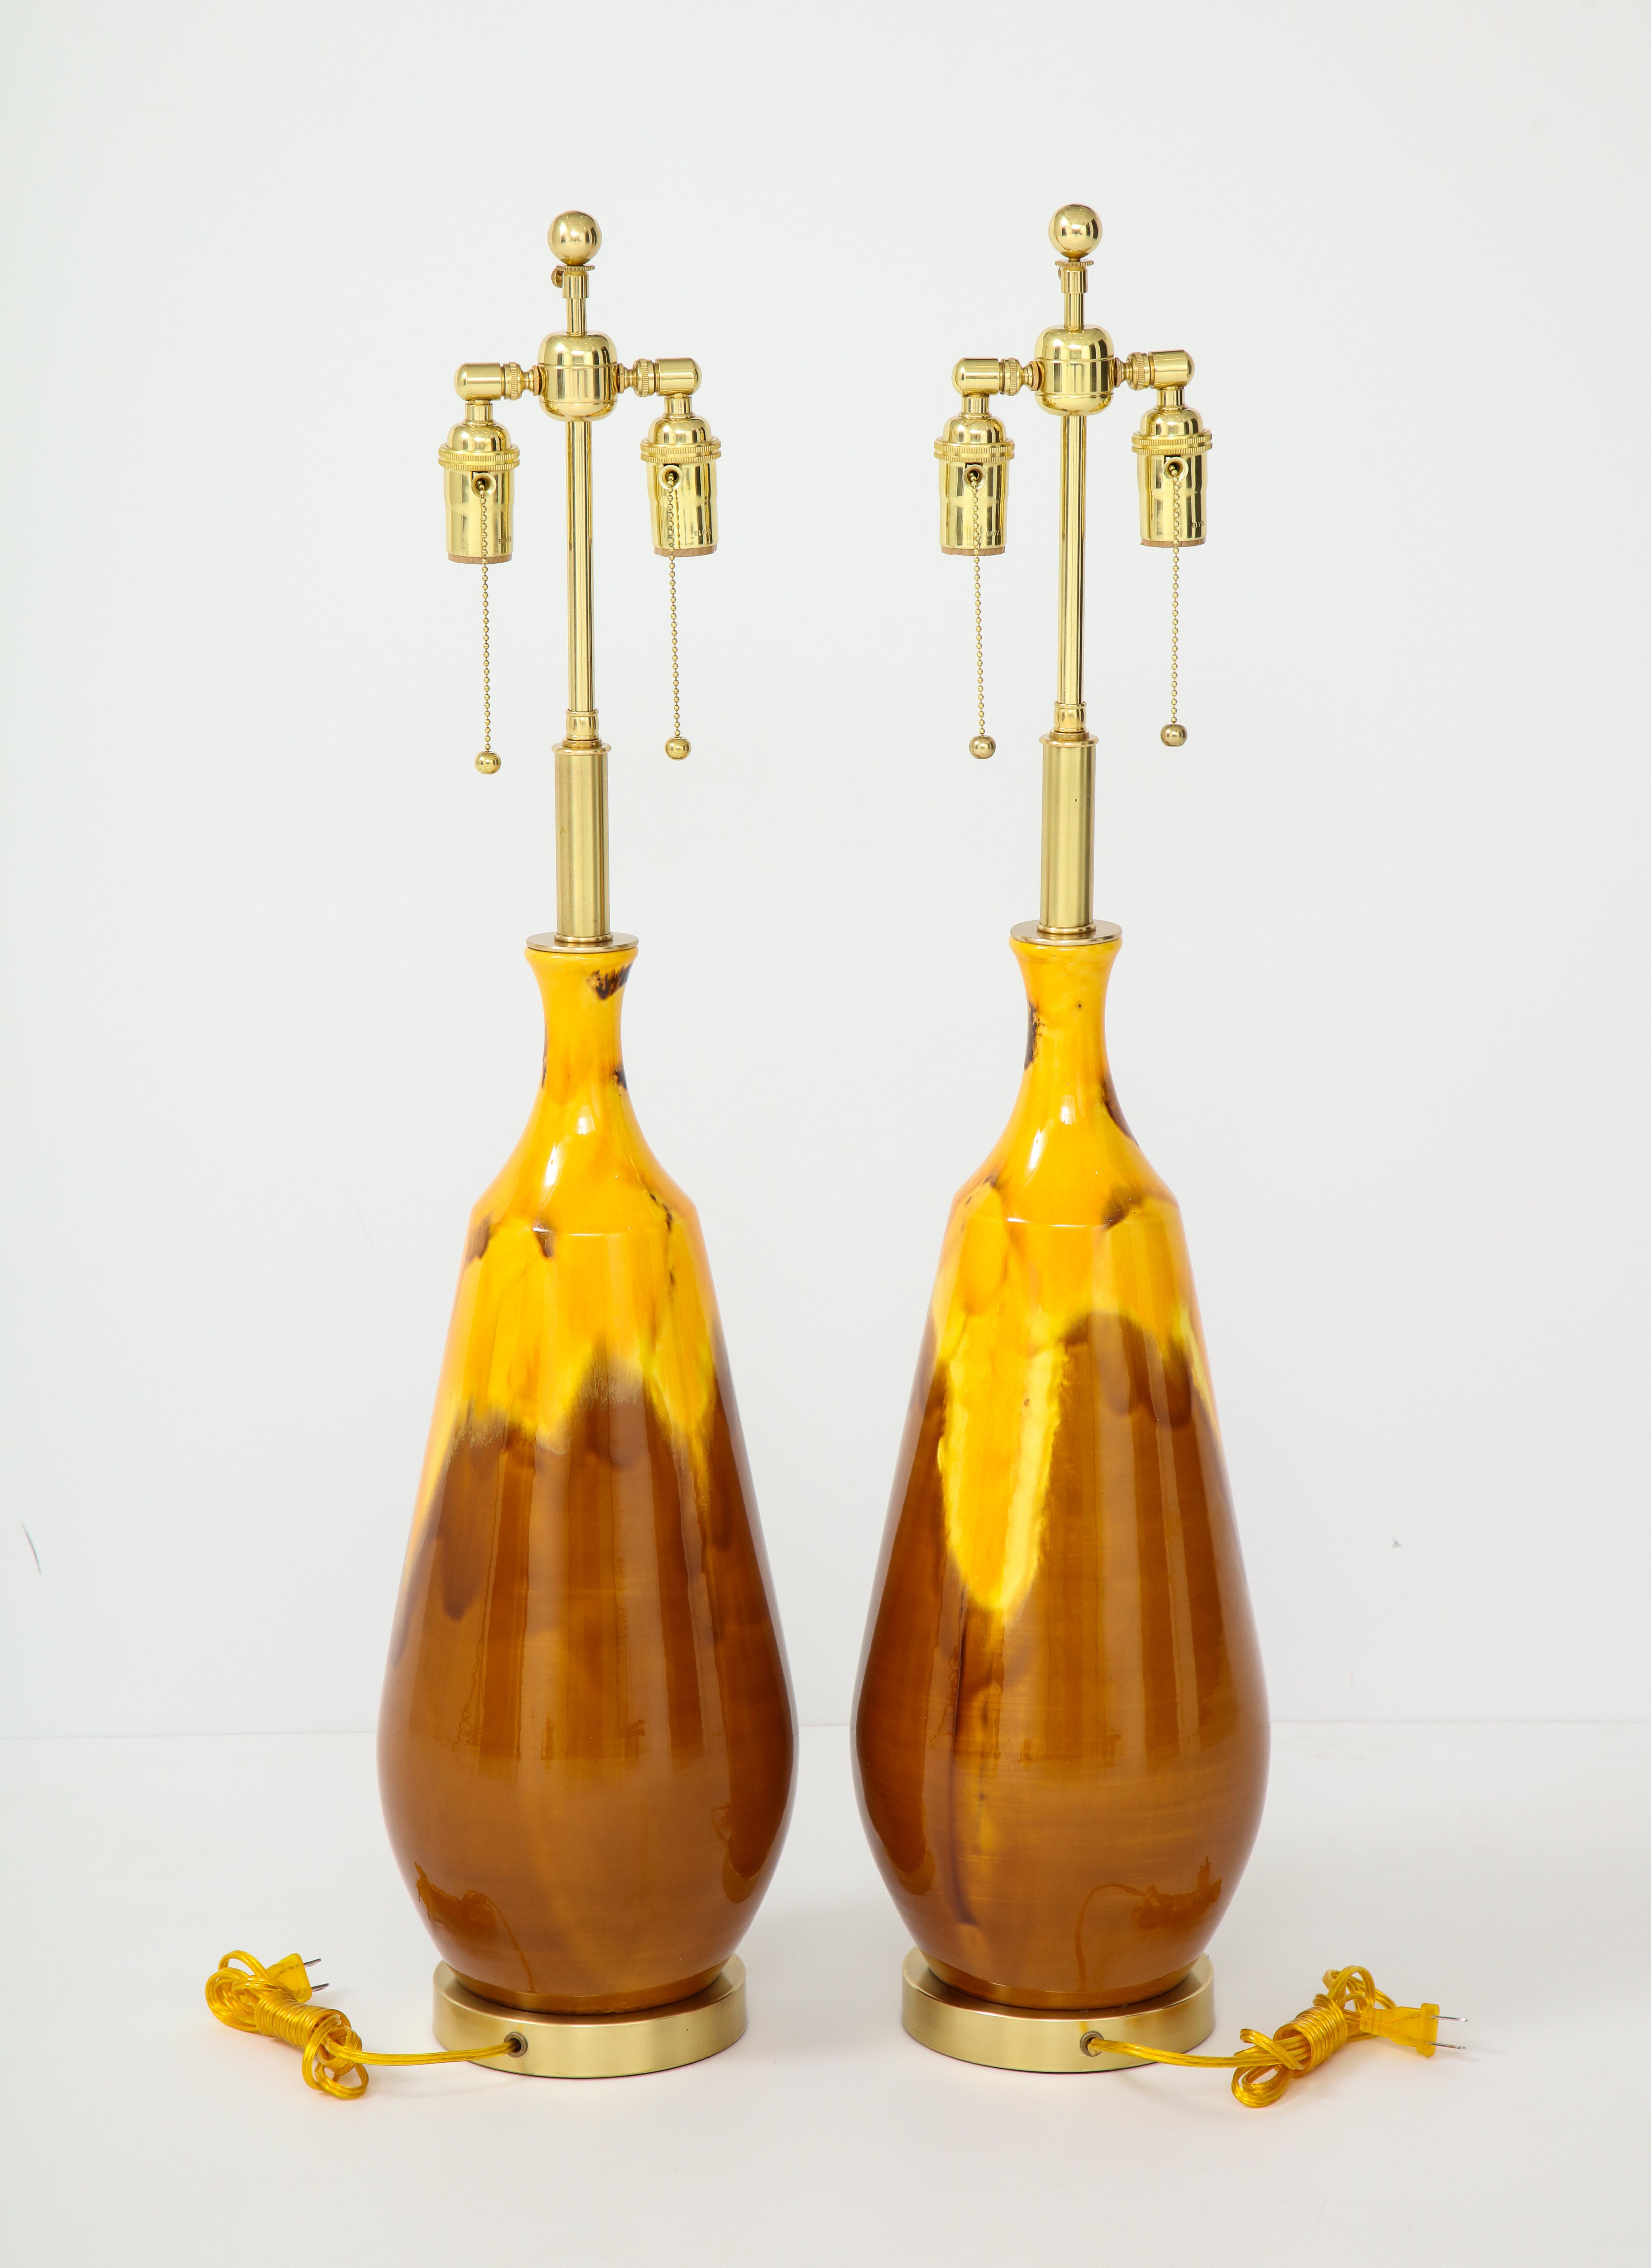 Pair of large ceramic lamps with a drip glazed finish.
The lamps have been newly rewired with polished brass fittings.